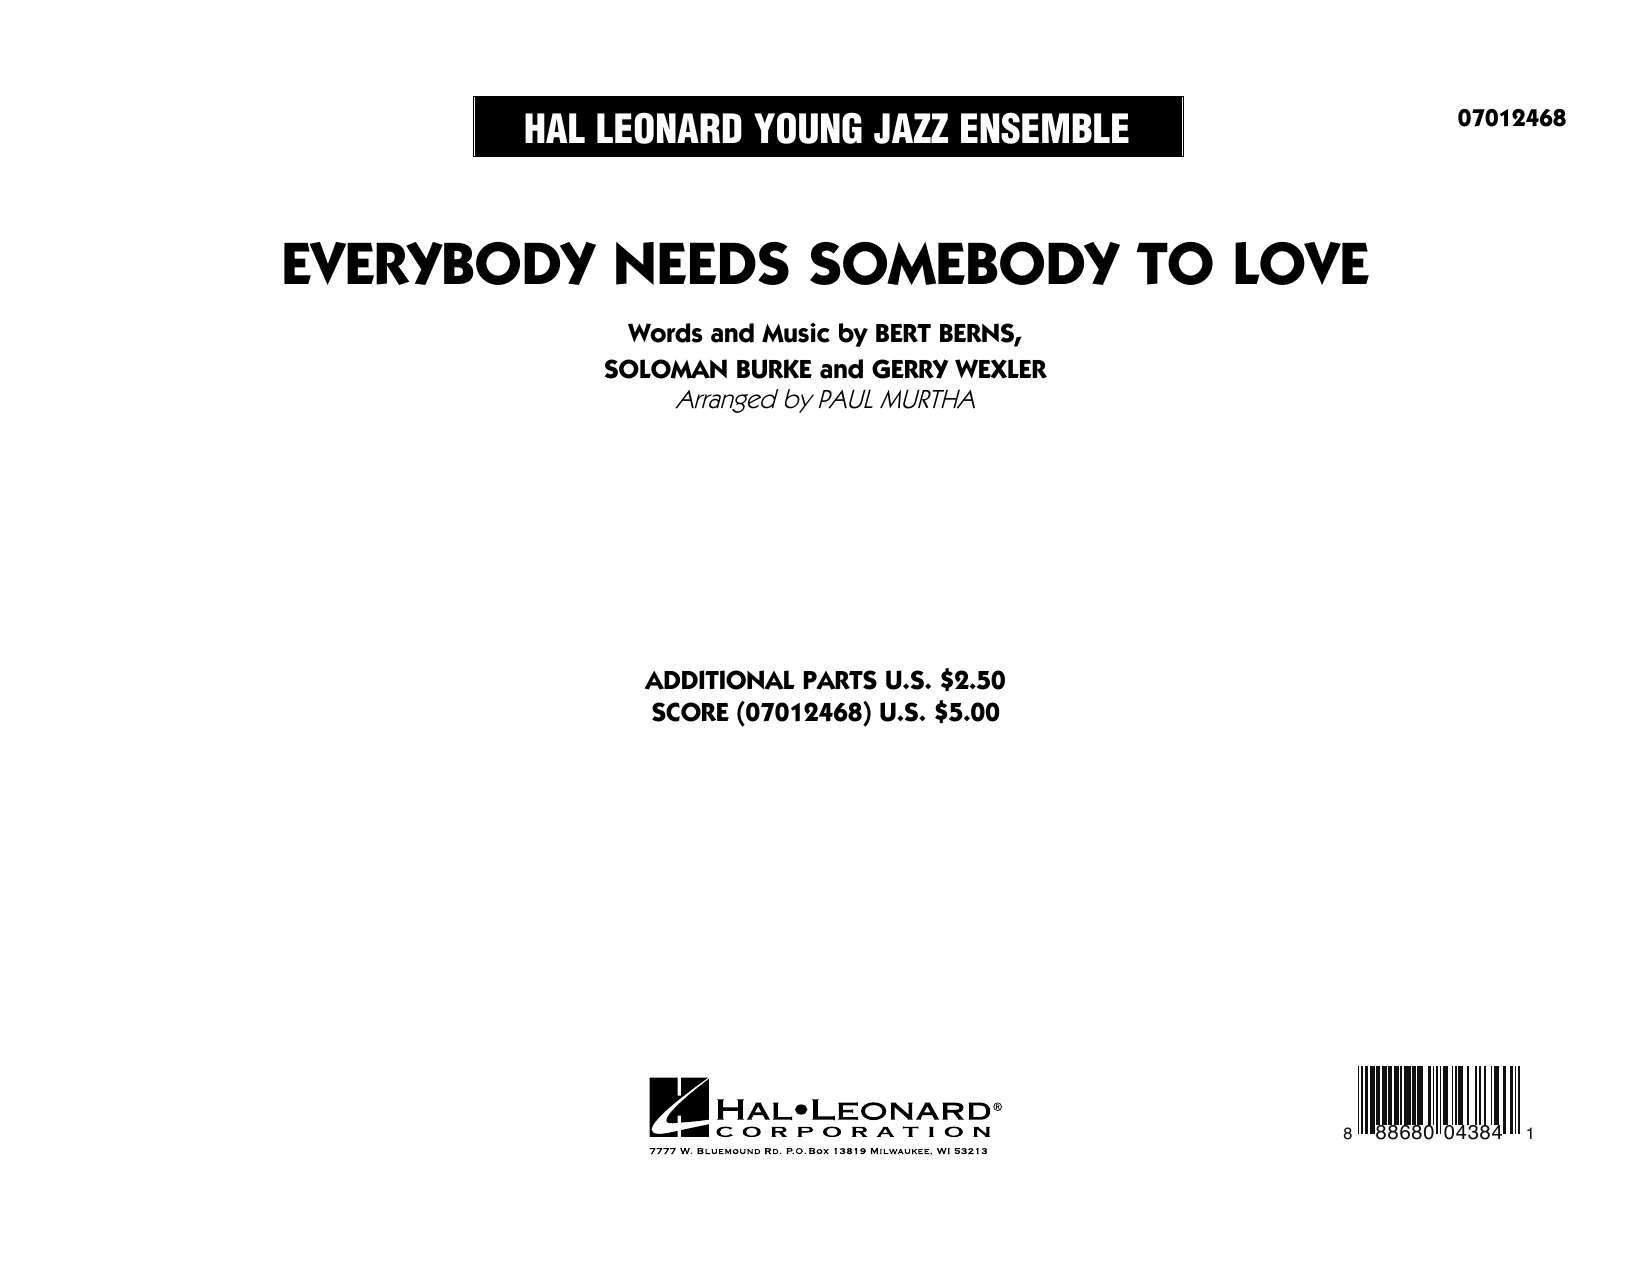 Paul Murtha Everybody Needs Somebody to Love - Conductor Score (Full Score) sheet music notes and chords. Download Printable PDF.